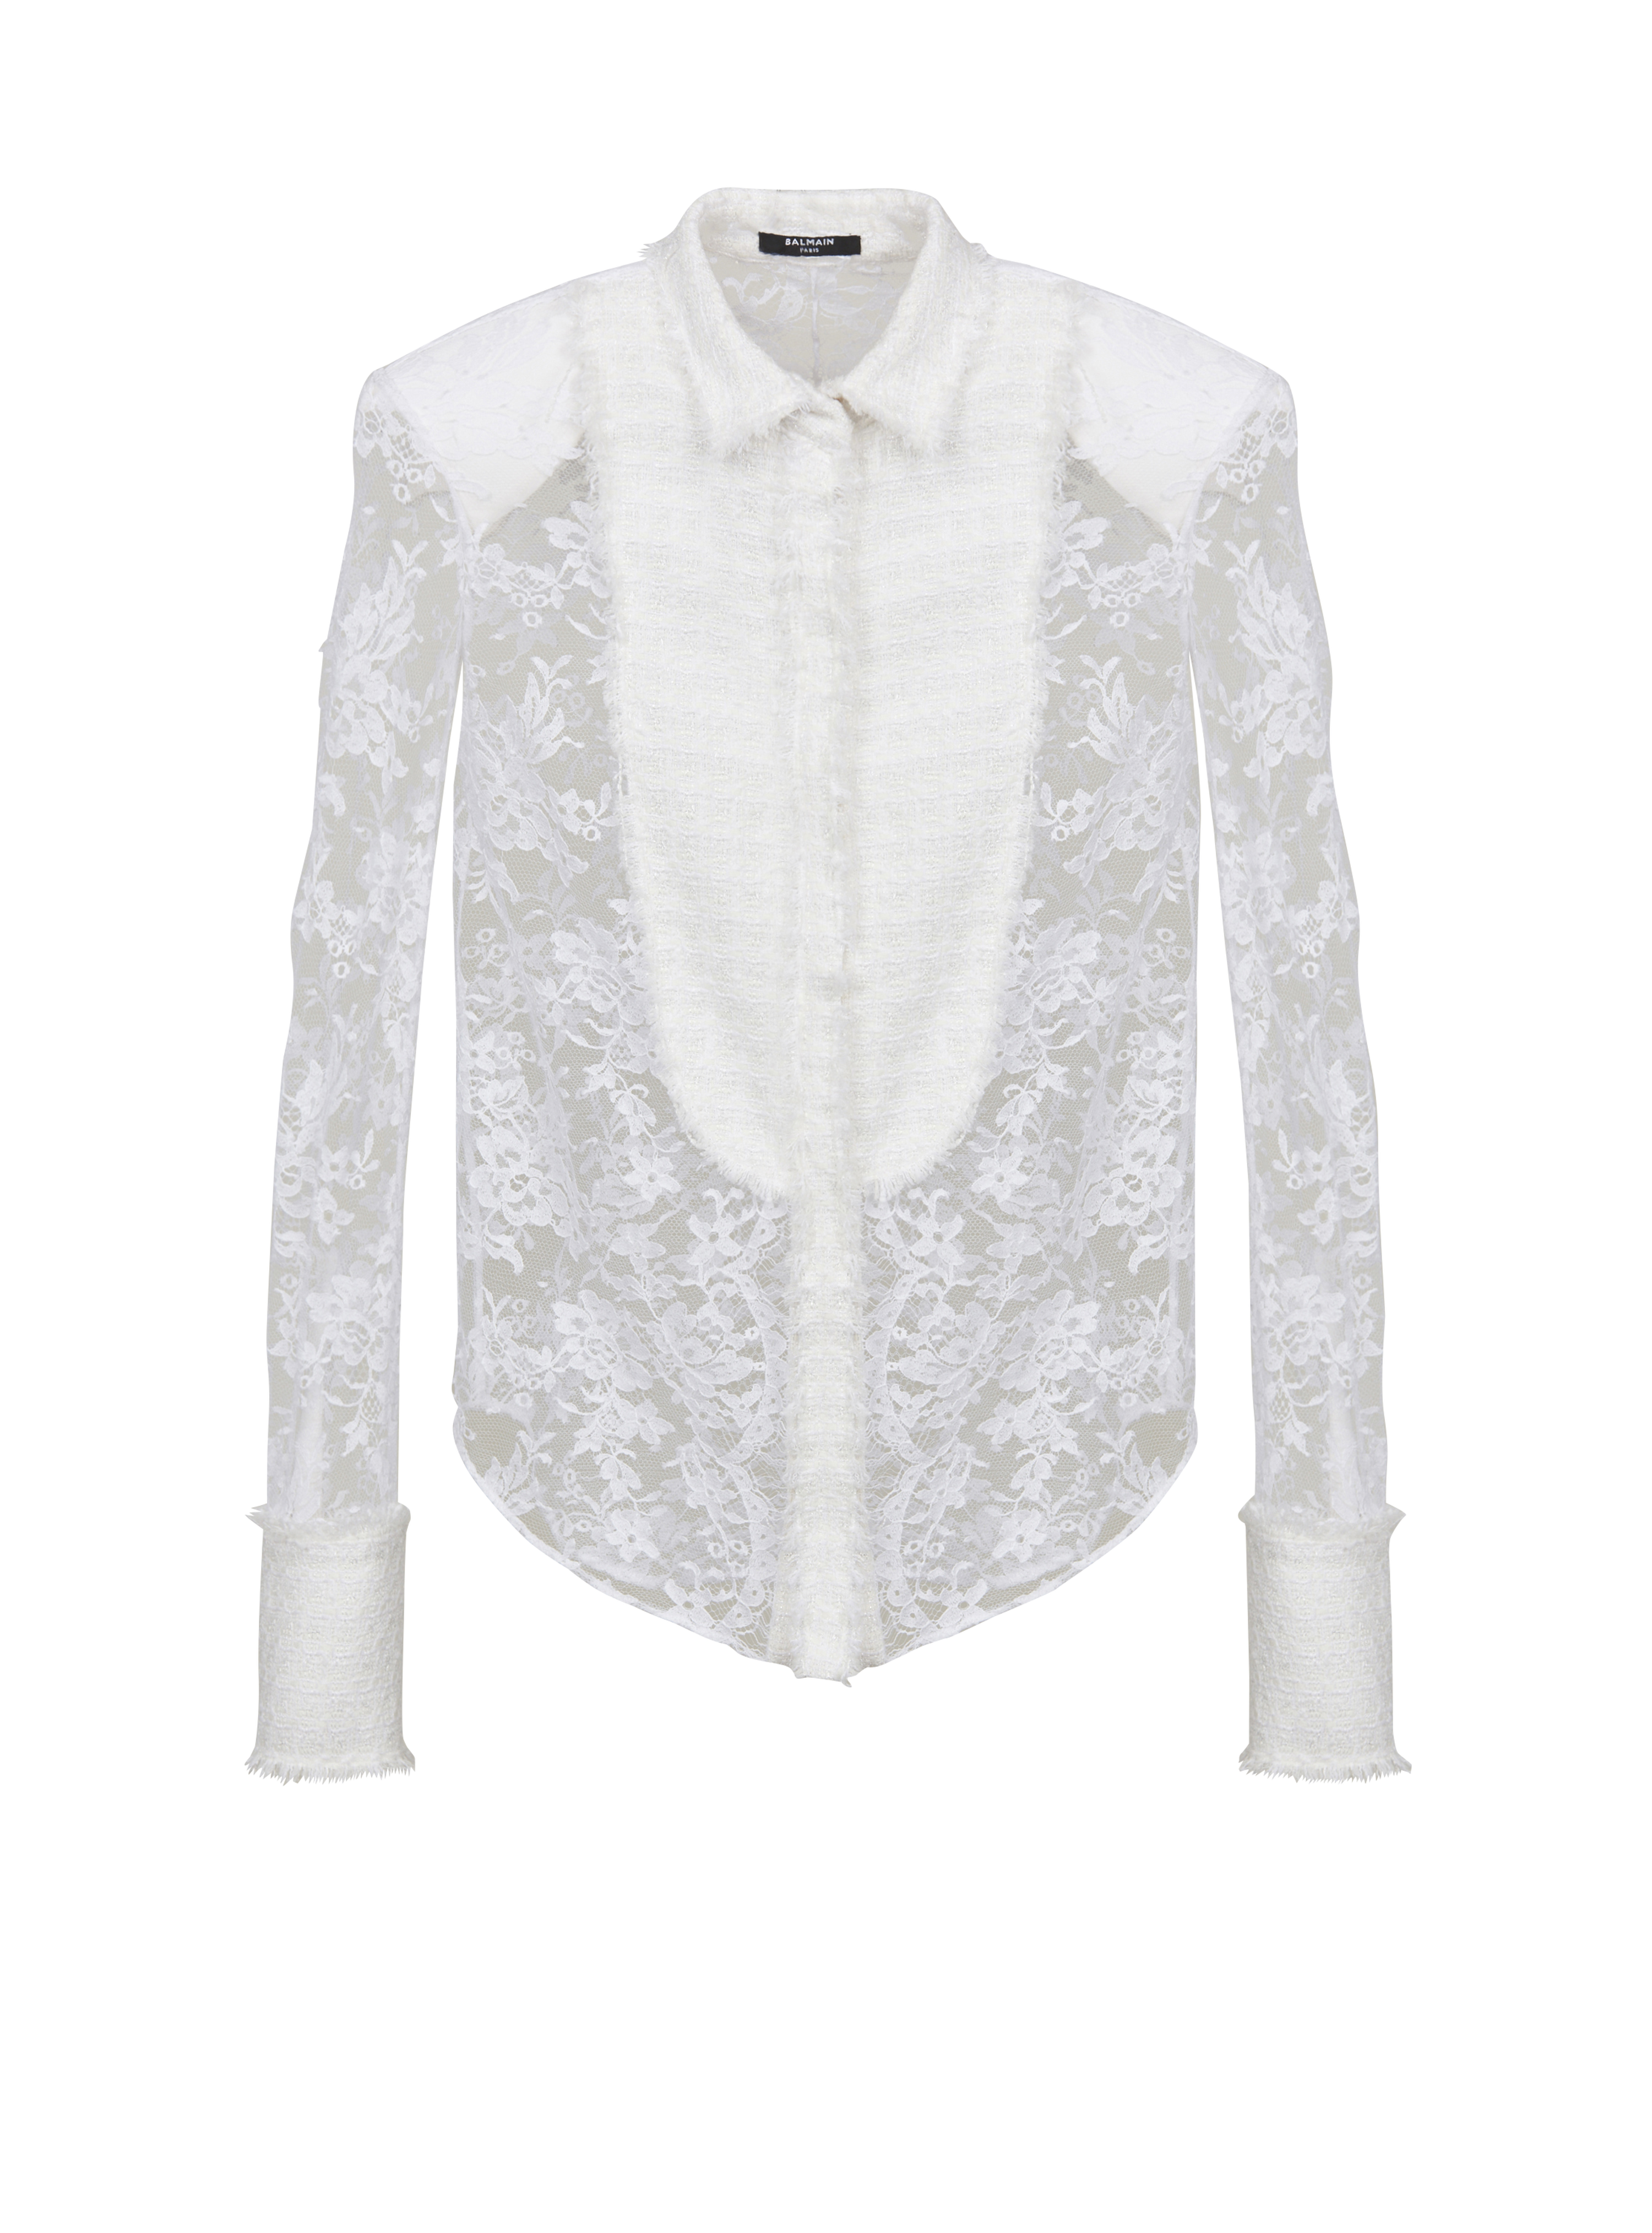 Cotton and lace top, white